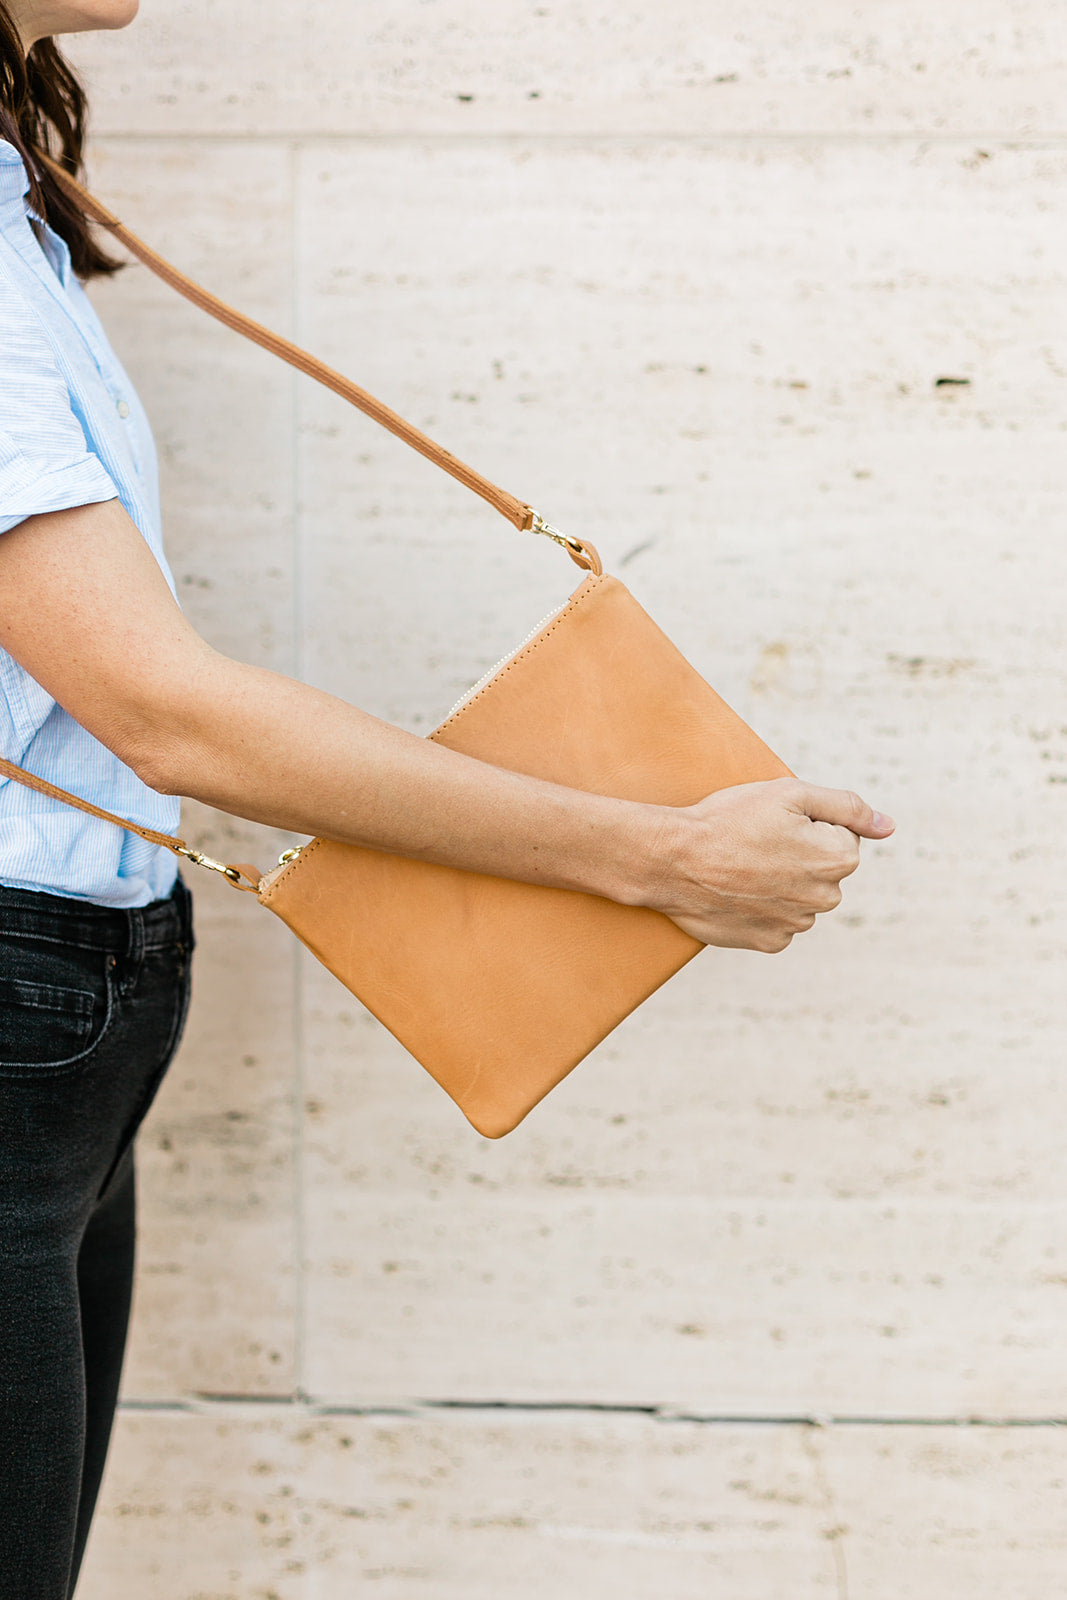 Ethically handmade brown leather purse